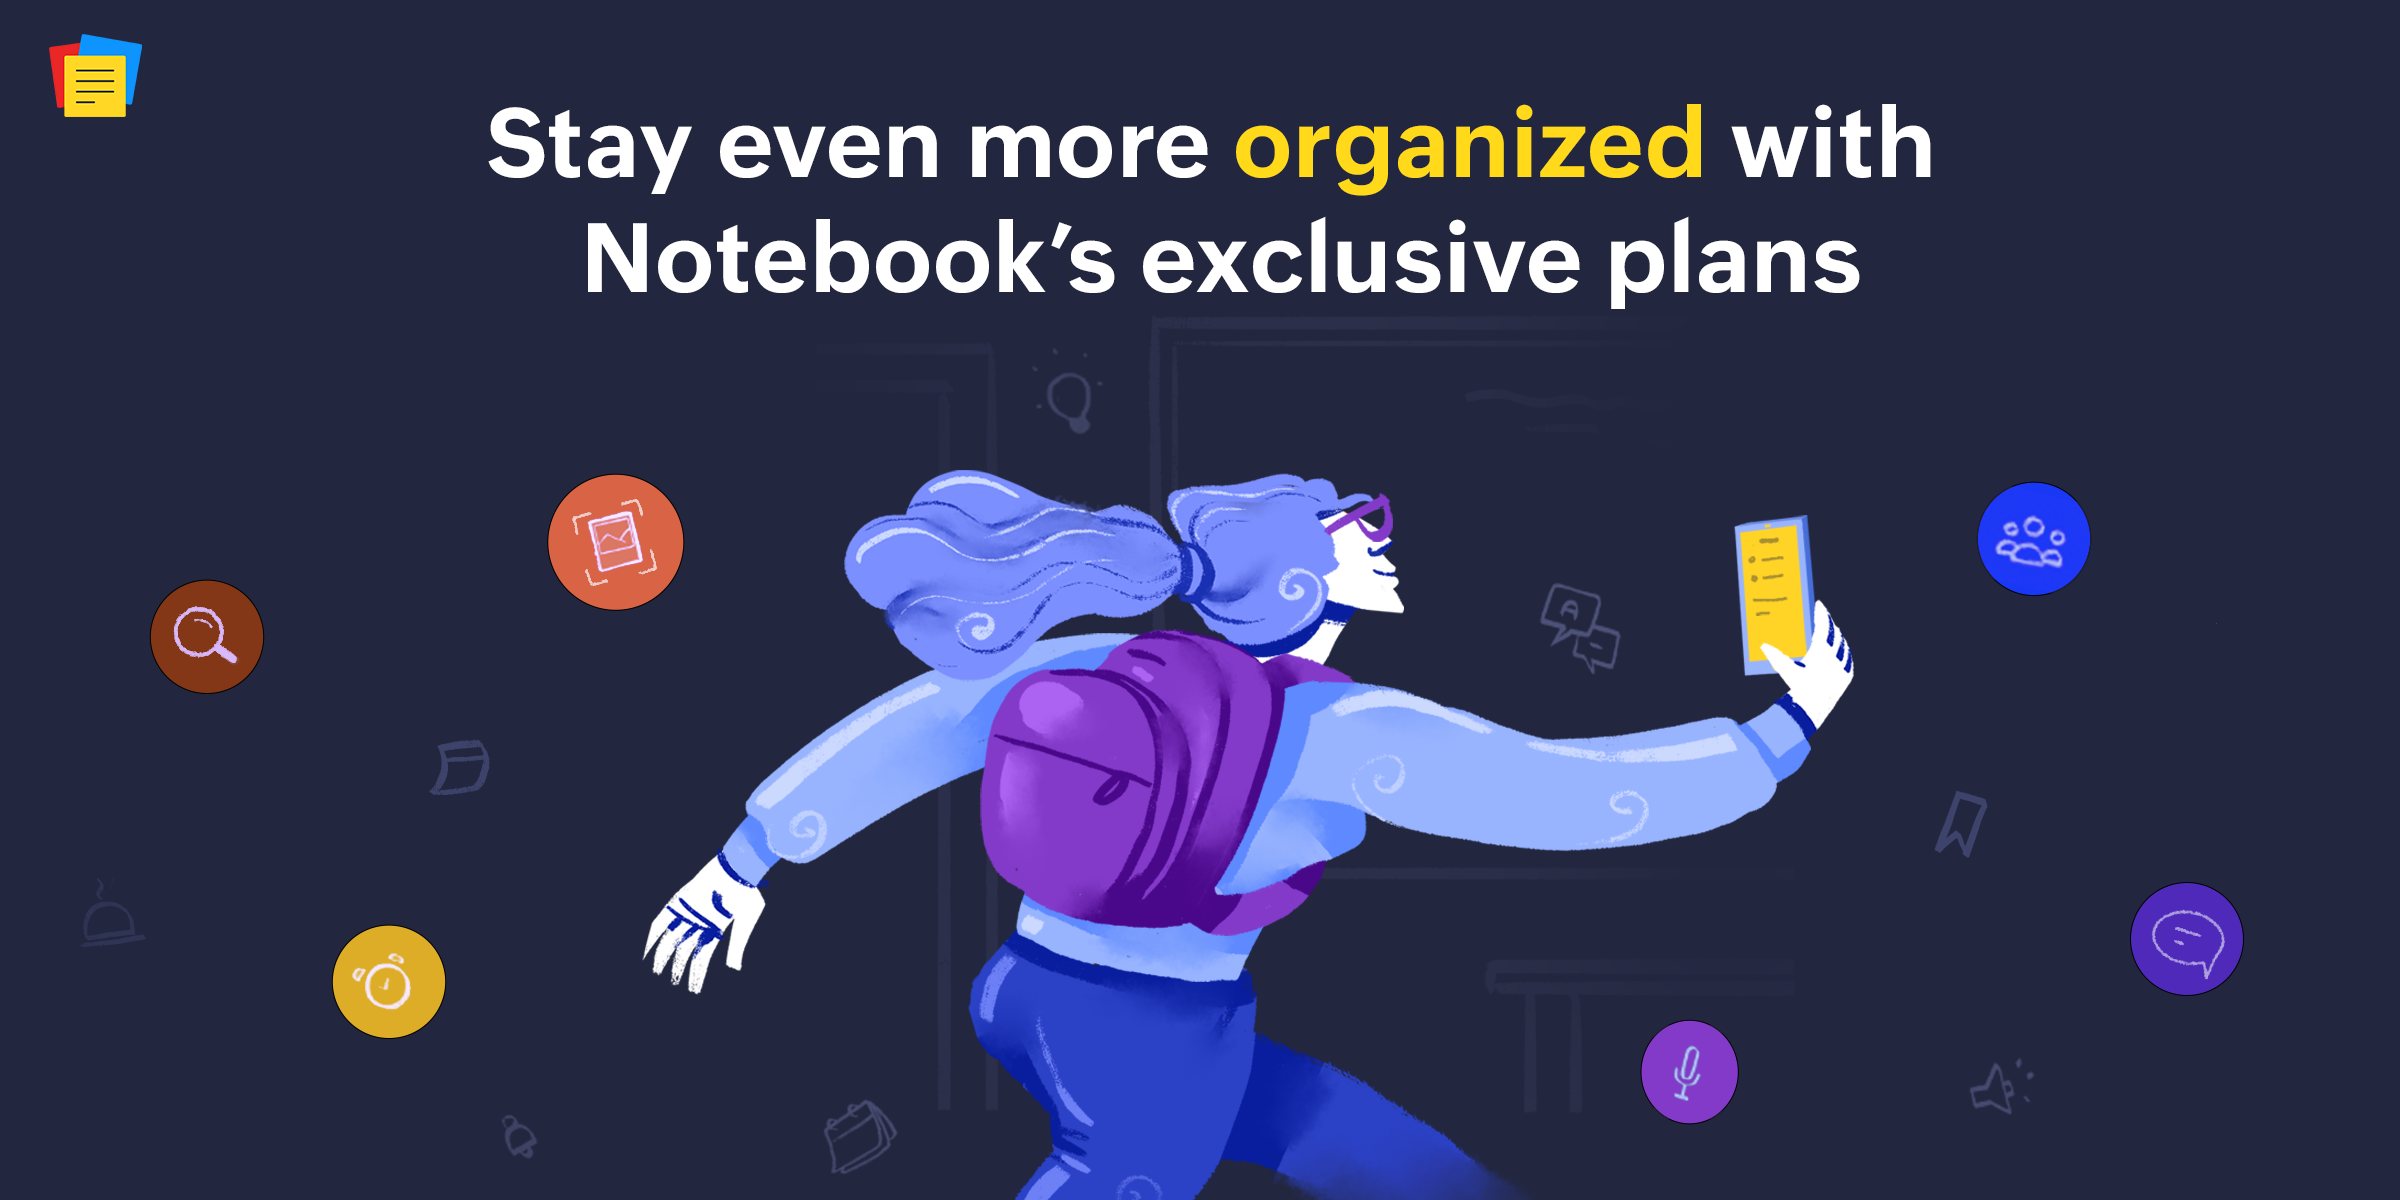 Stay Even More Organized With Notebook’s Exclusive Plans